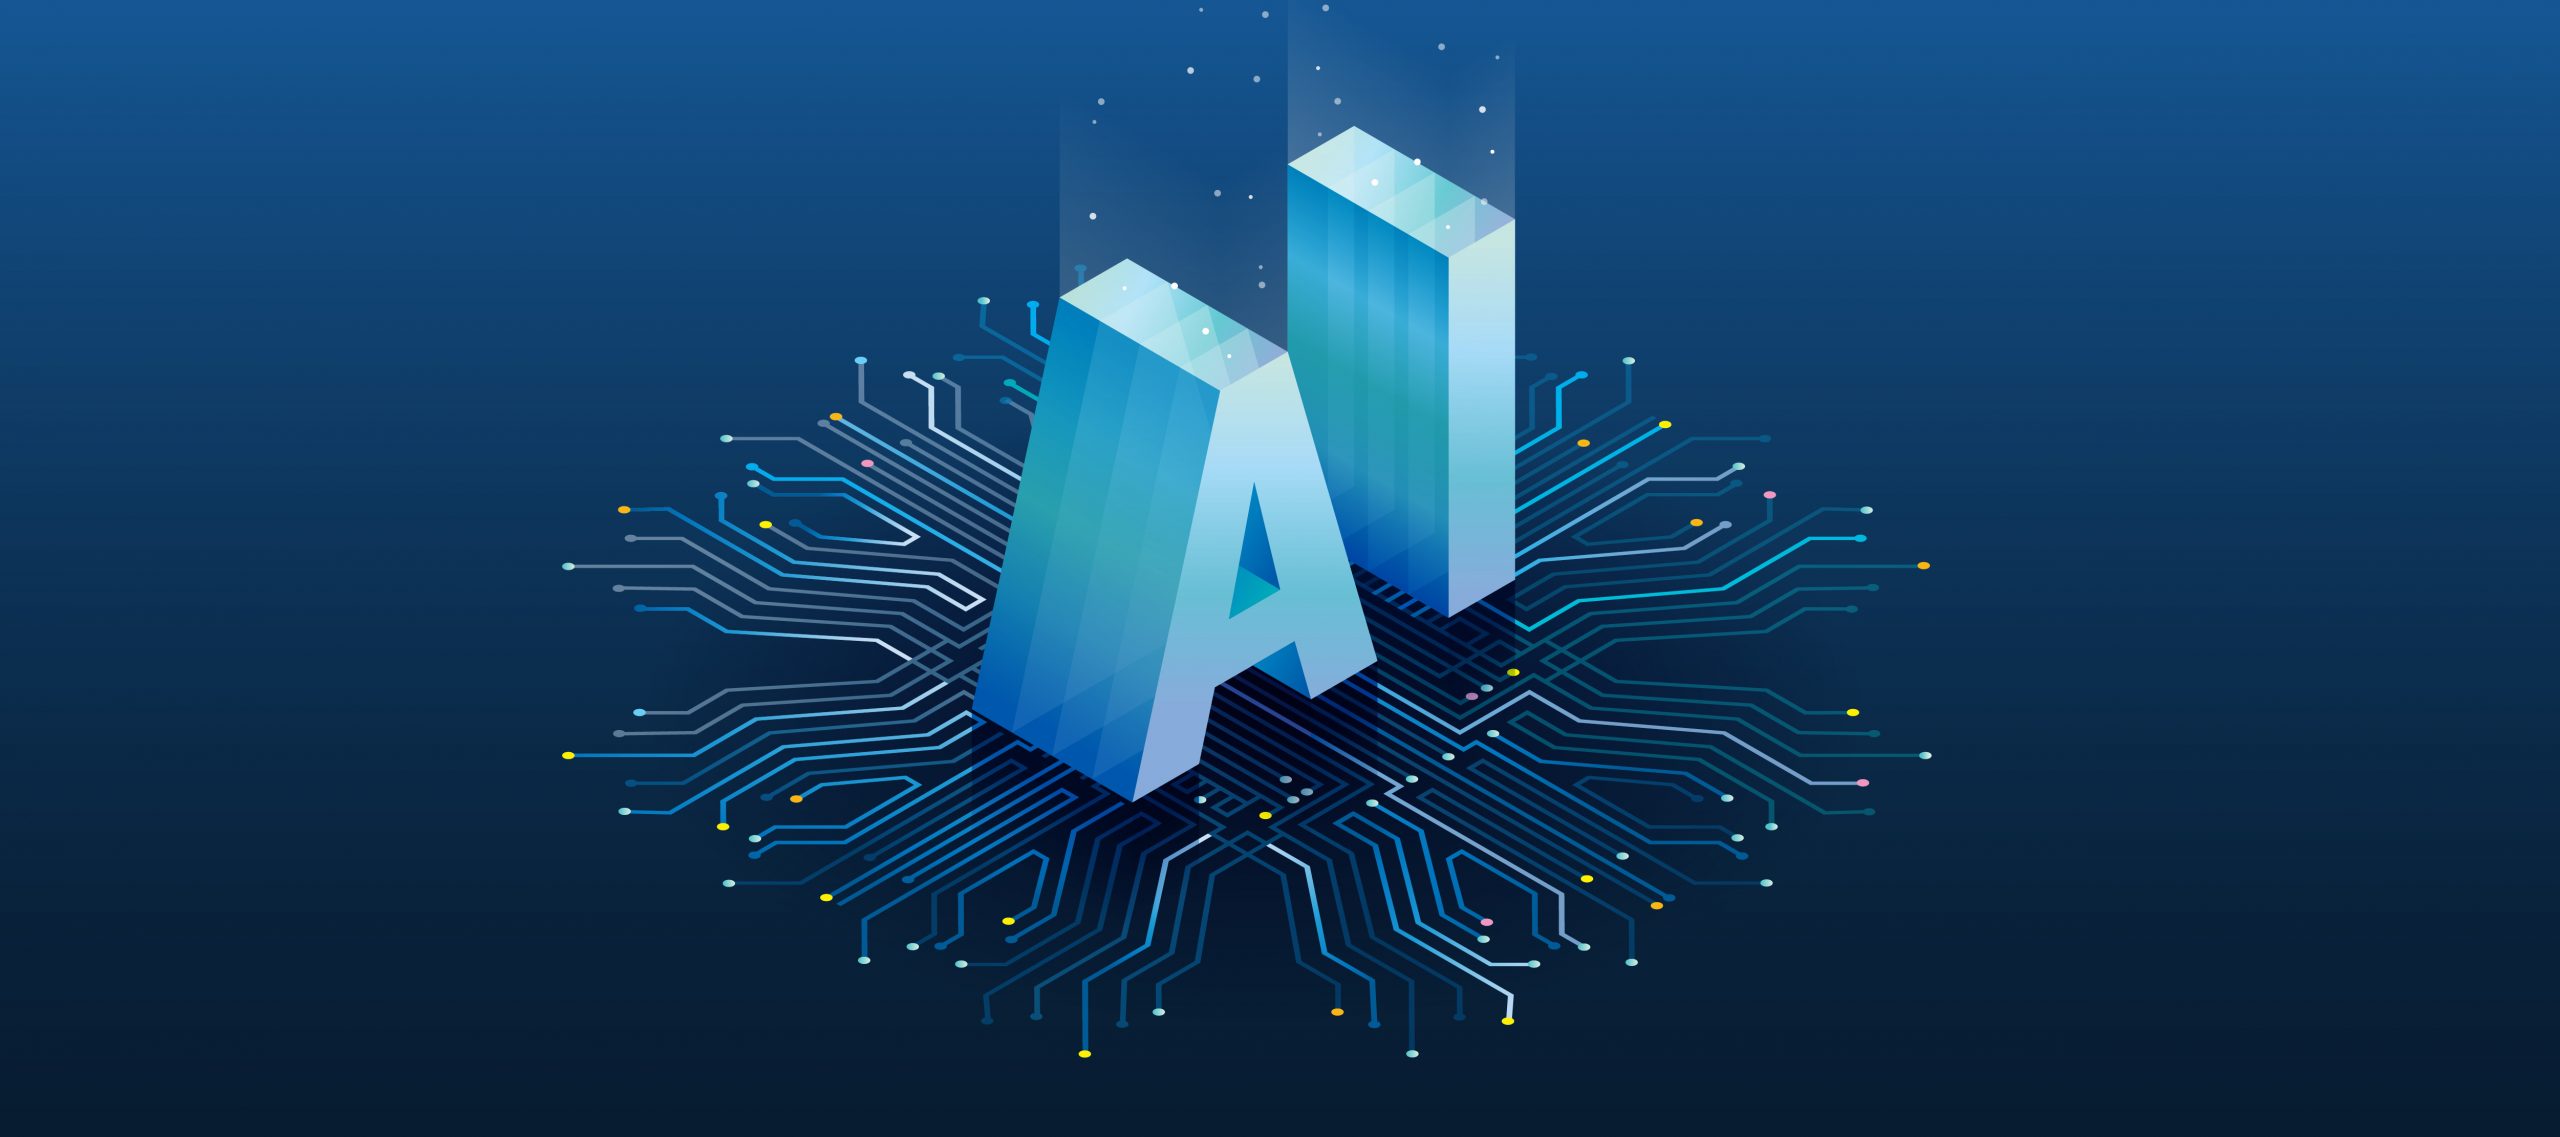 What The NAIC's Guiding Principles on AI Say | Insurtech Insights